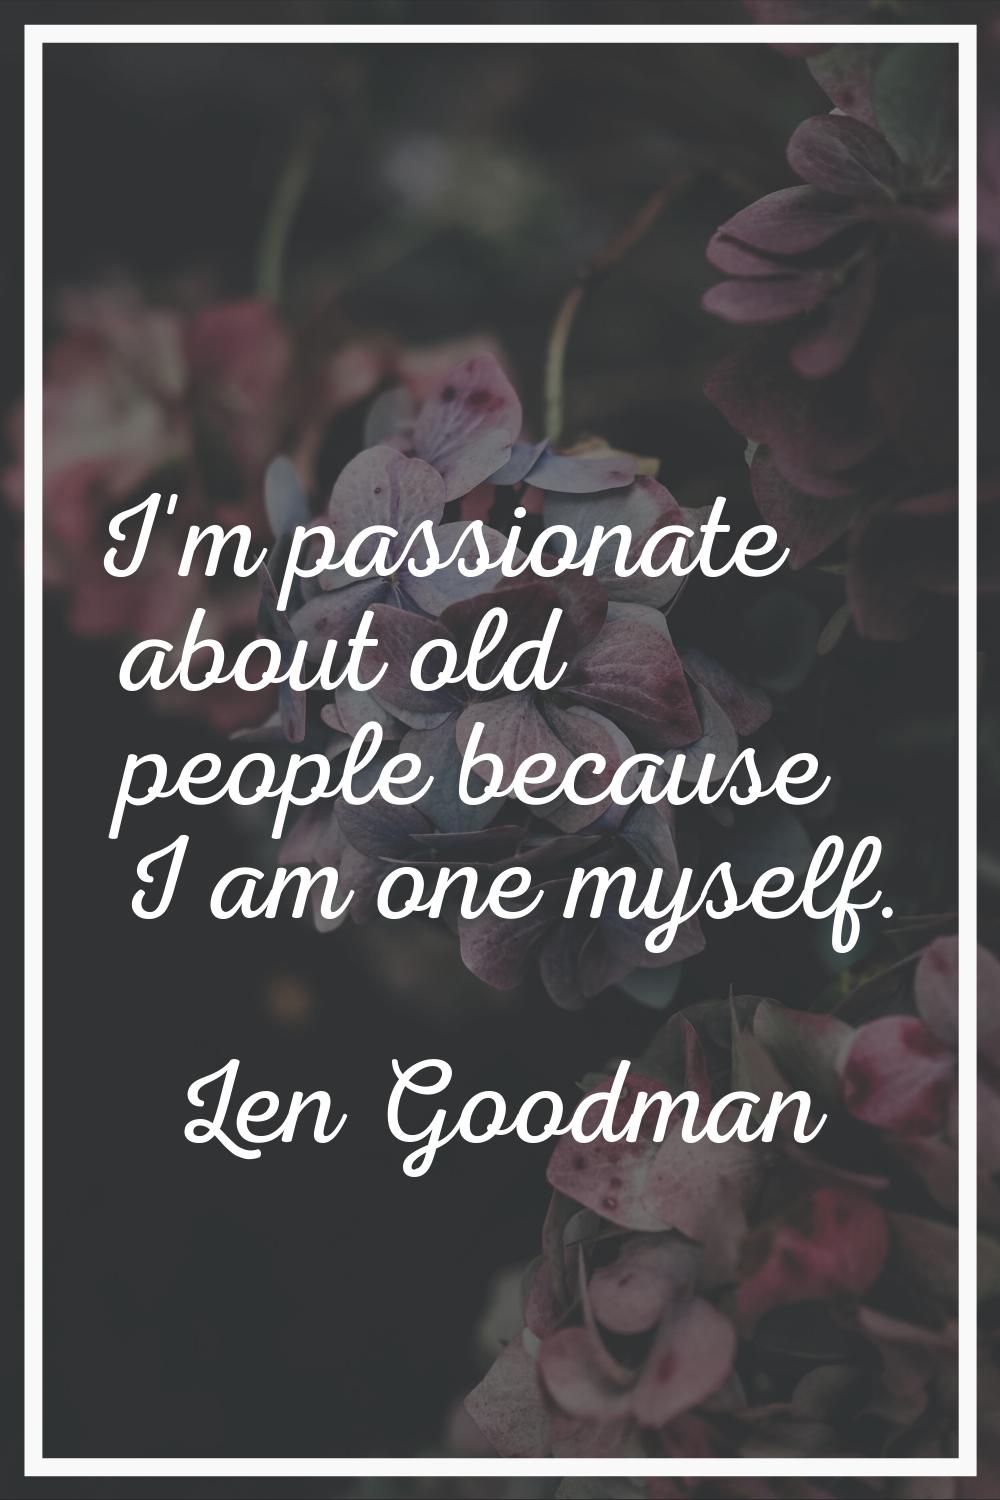 I'm passionate about old people because I am one myself.